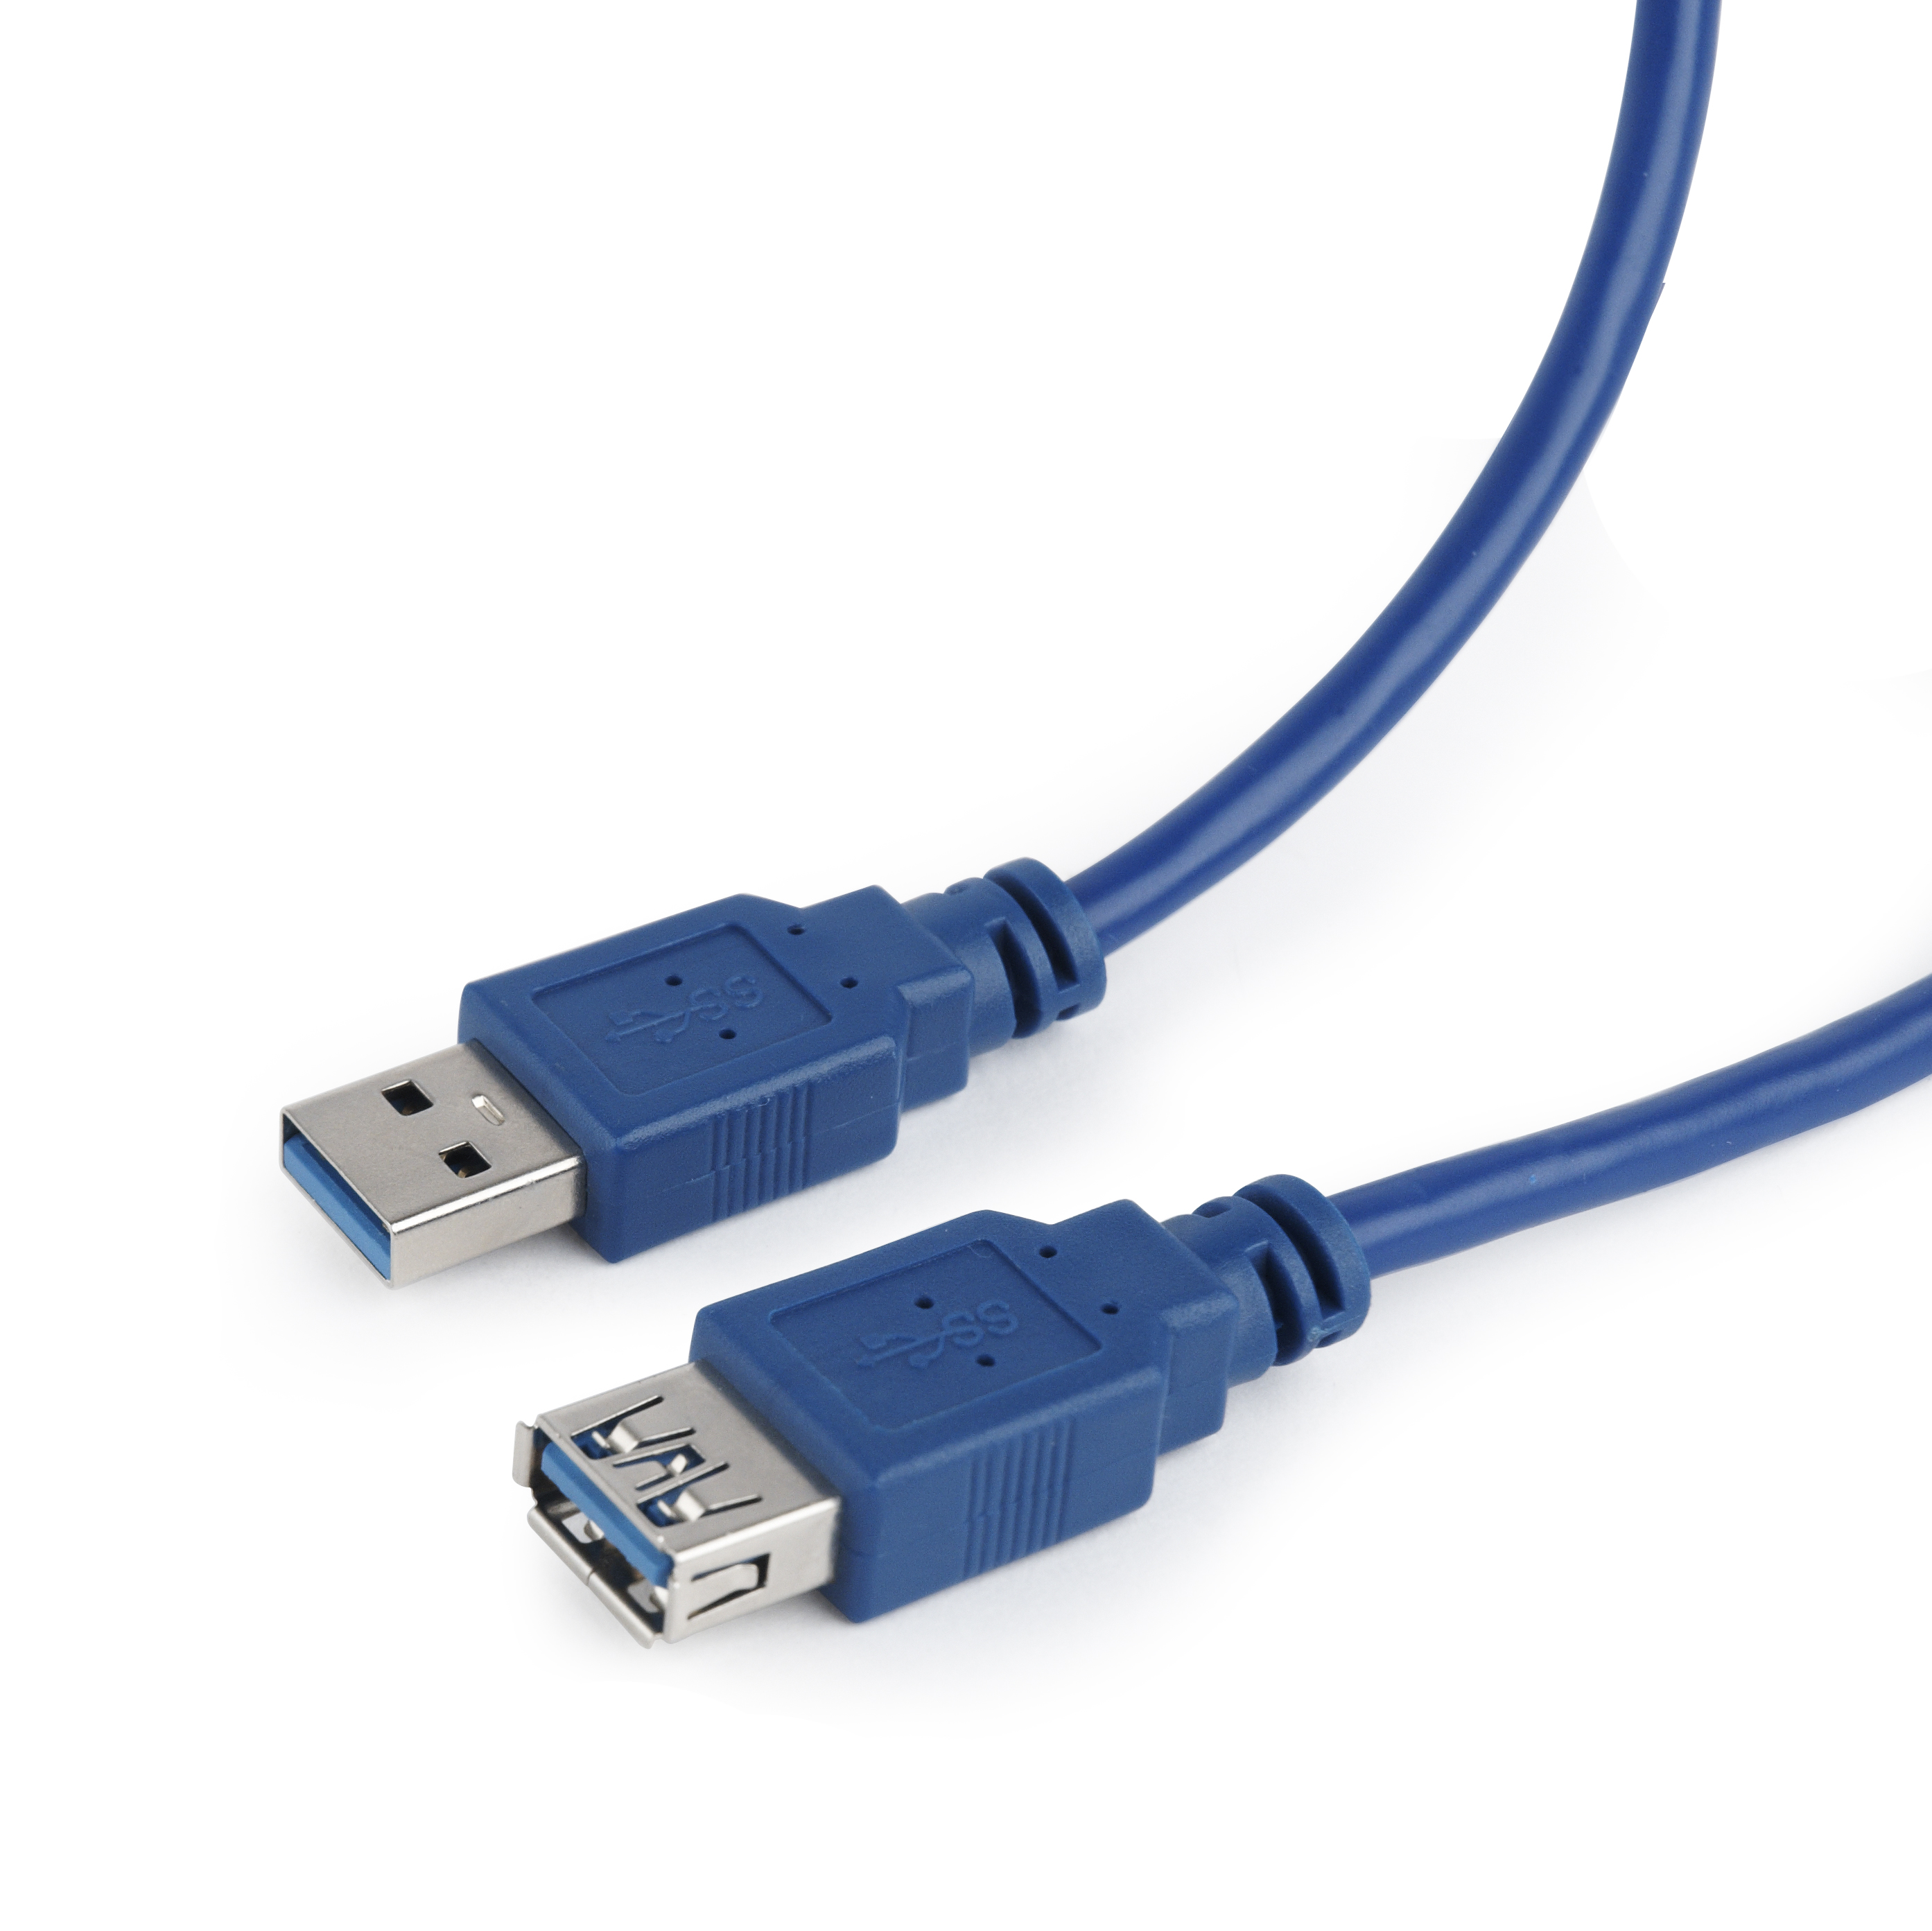 Gembird USB3-AMAF-6 USB 3.0 extension cable 1.8m, USB3